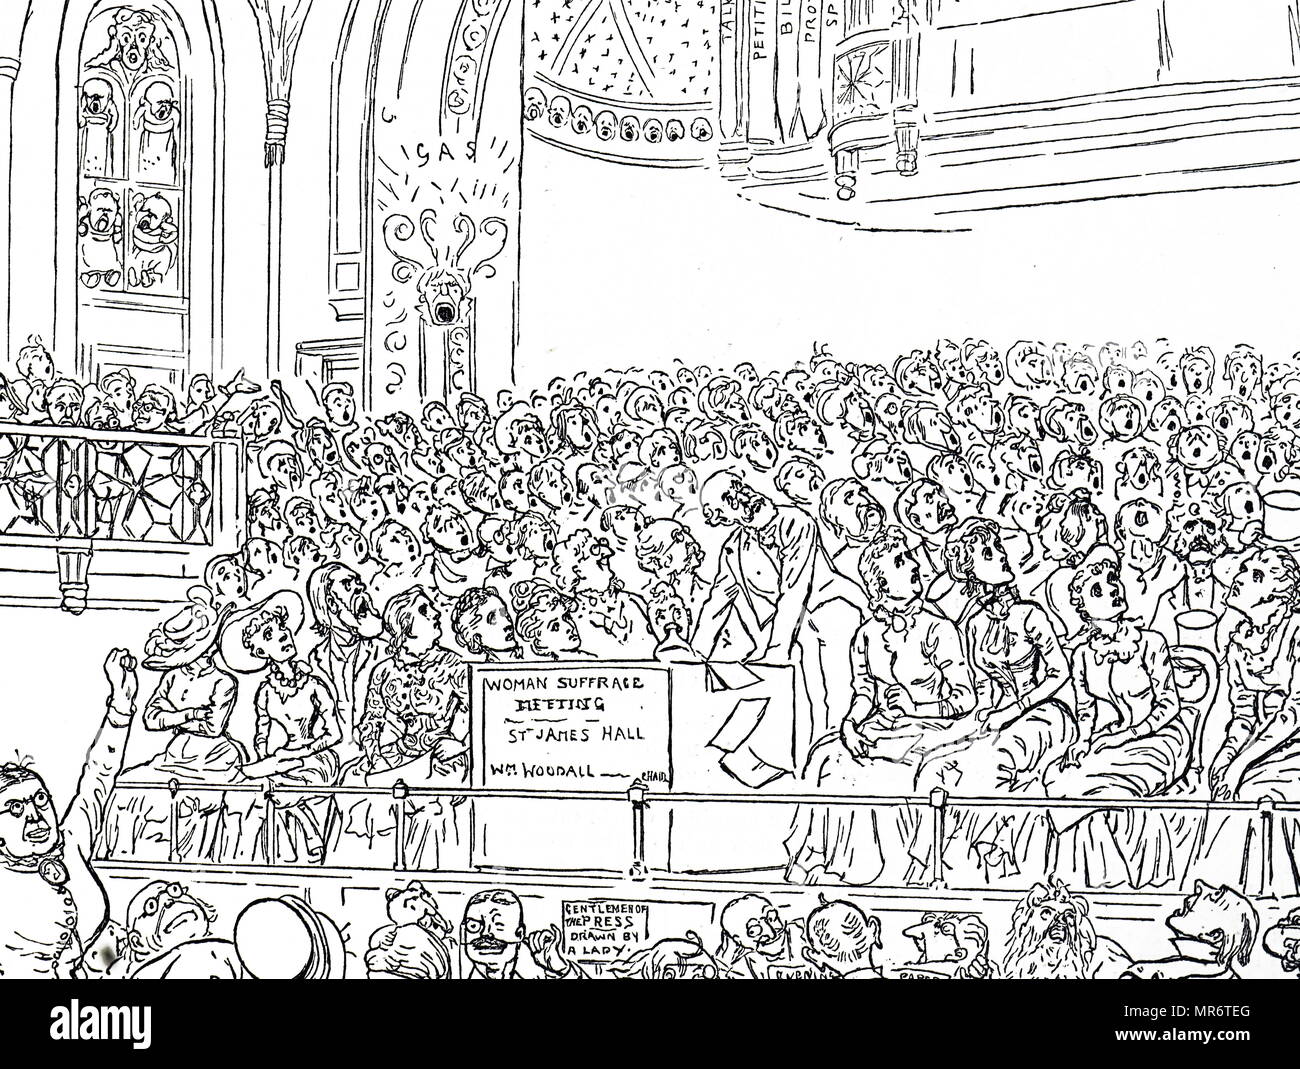 Cartoon commenting on the women's suffrage movement - Women's suffrage meeting in St James' Hall, London. Dated 20th century Stock Photo